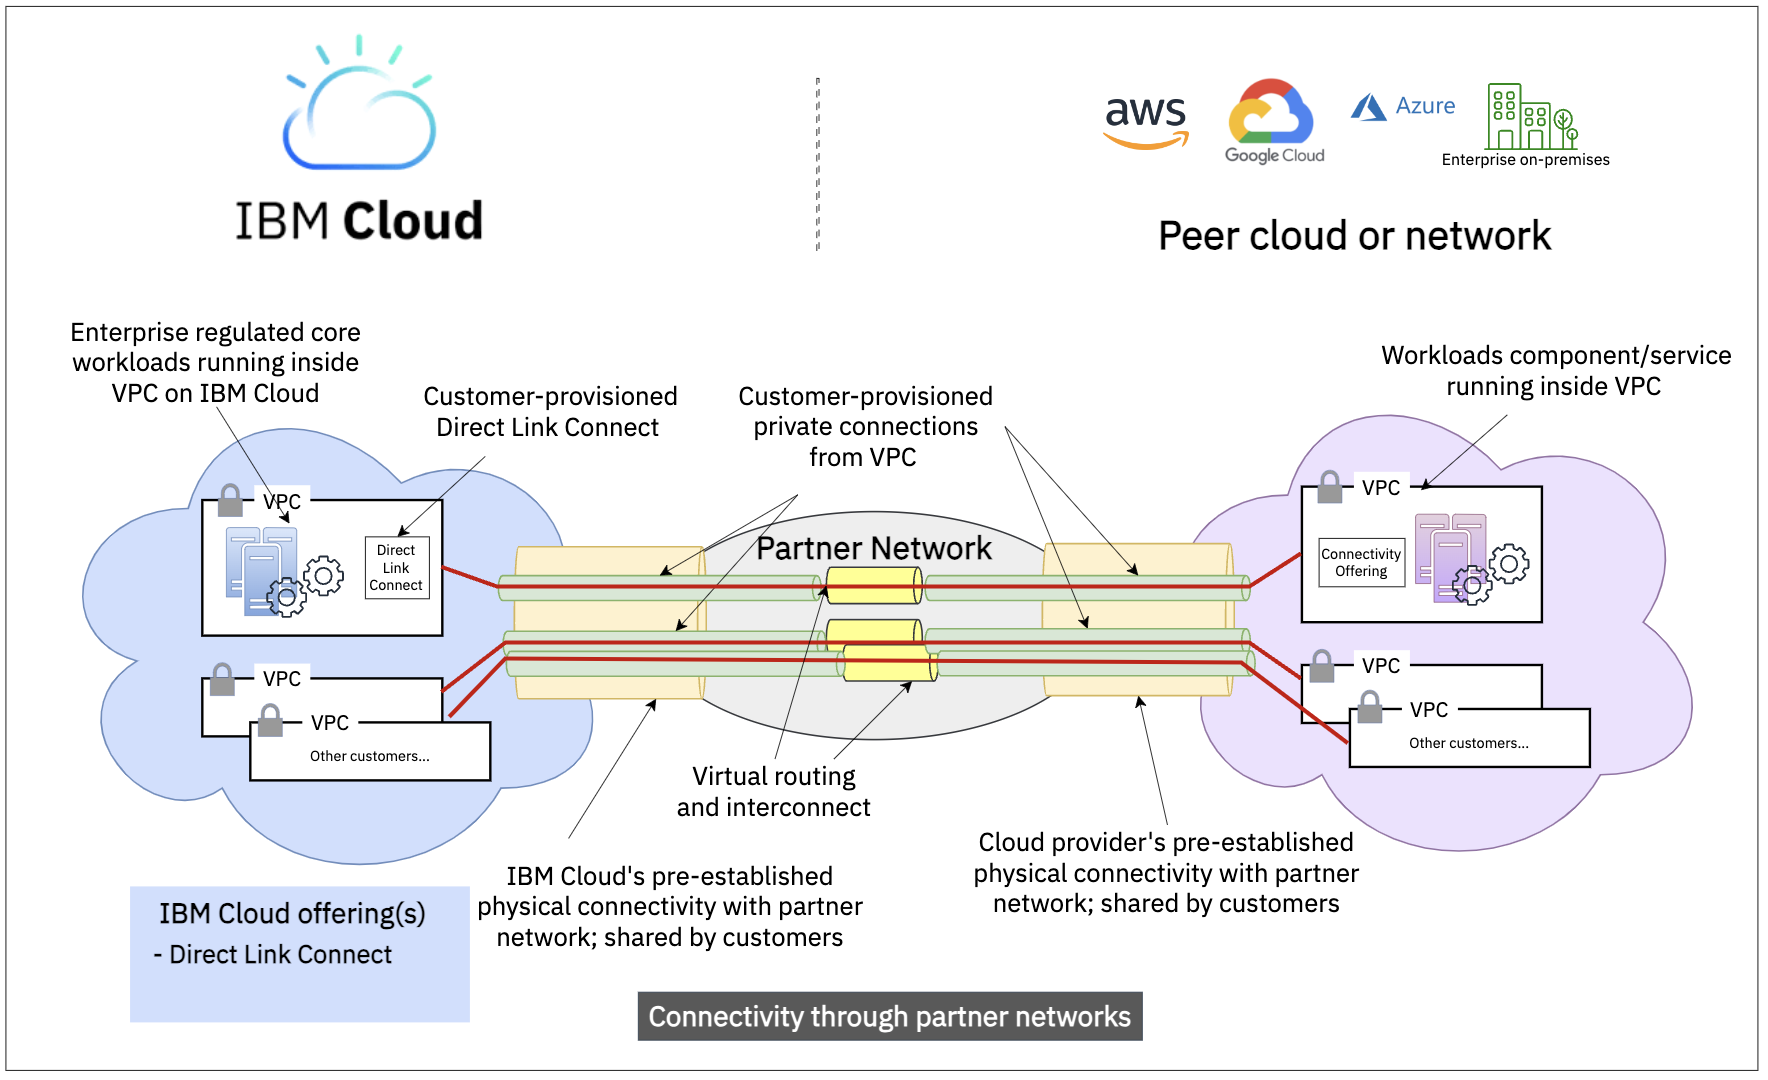 Figure 6: High-level view of the cloud-to-cloud connectivity between IBM Cloud and other peer cloud through partner networks.